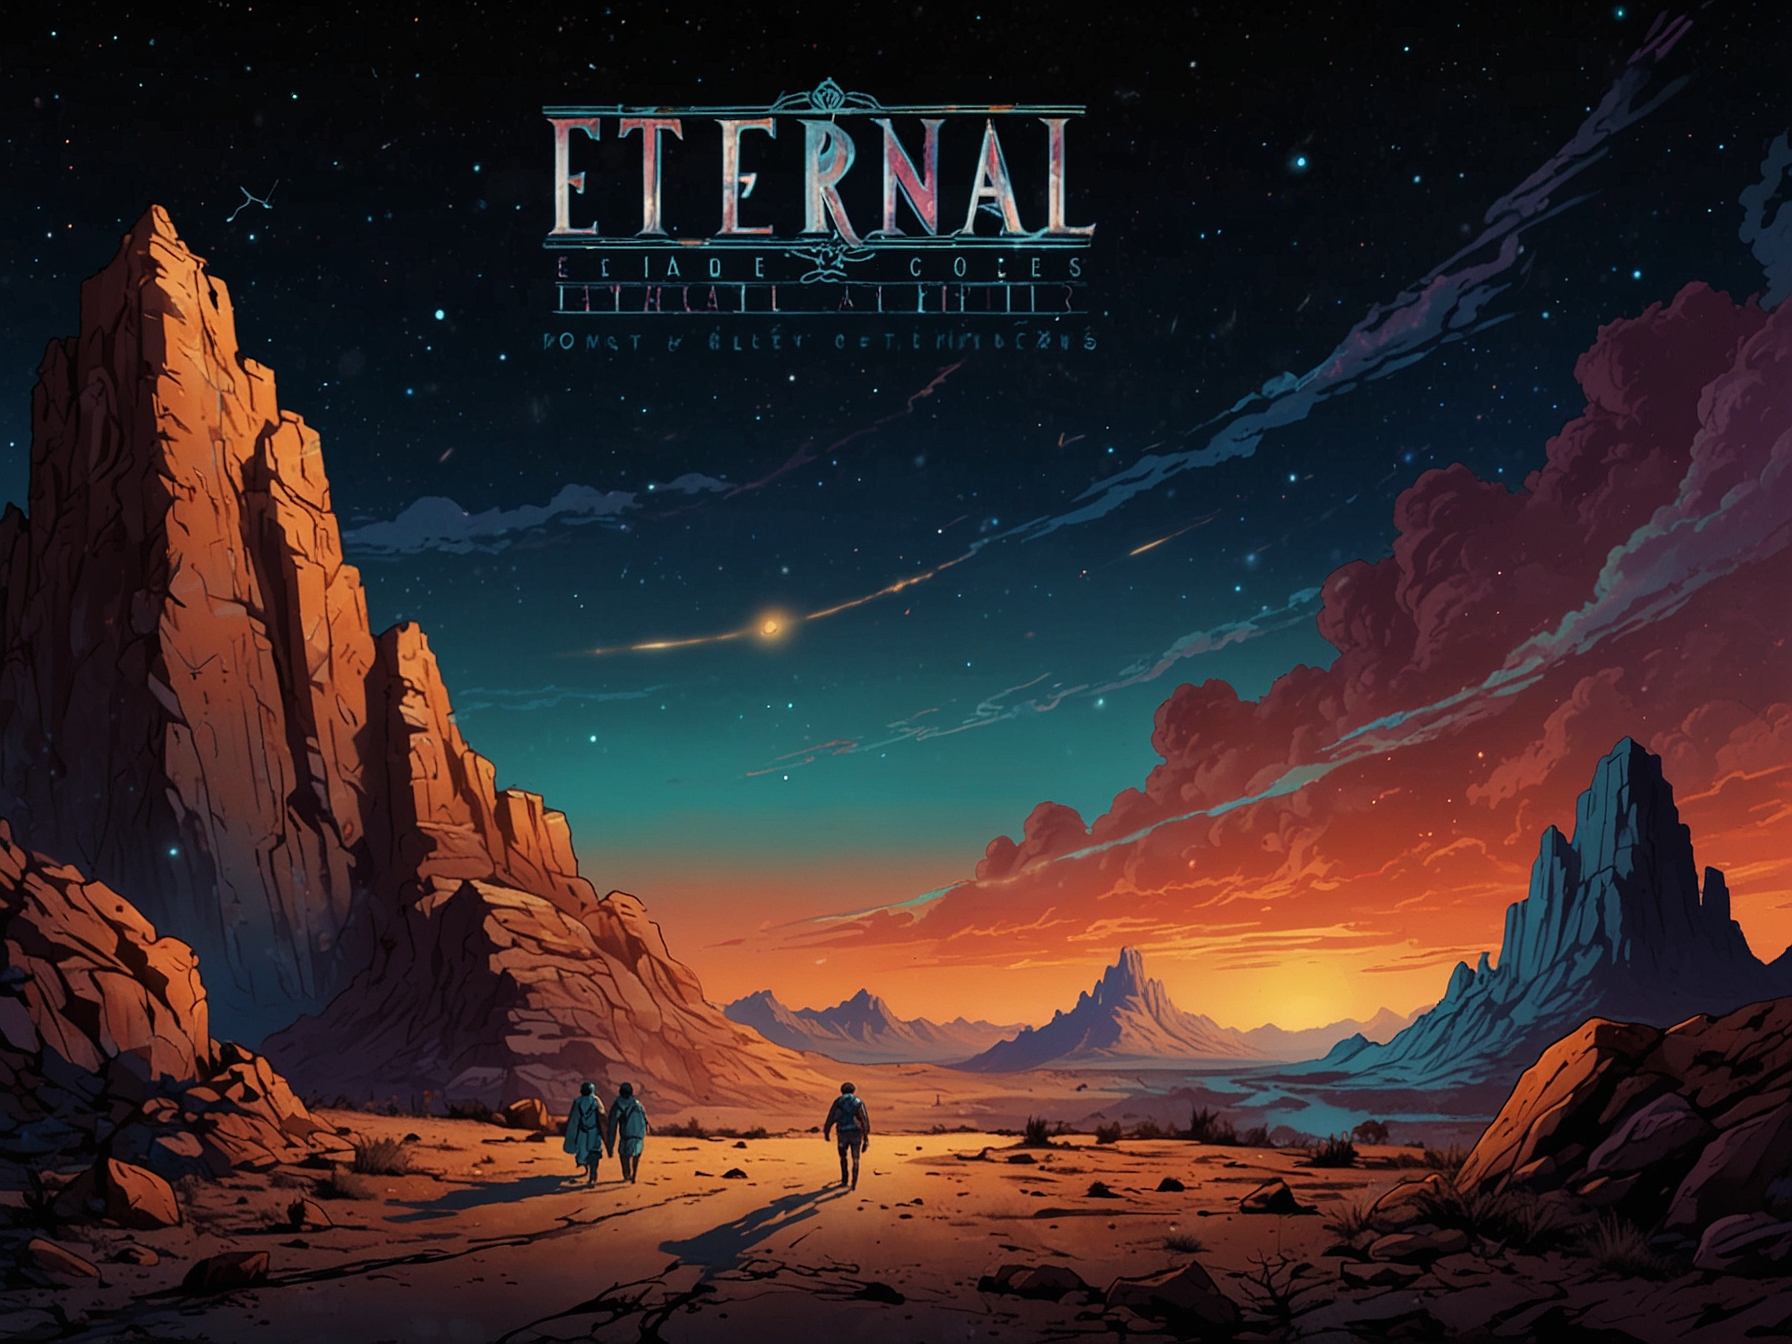 The album cover artwork for 'Eternal Echoes' featuring a retro design that blends 80s aesthetics with modern elements, signaling the band's musical evolution.